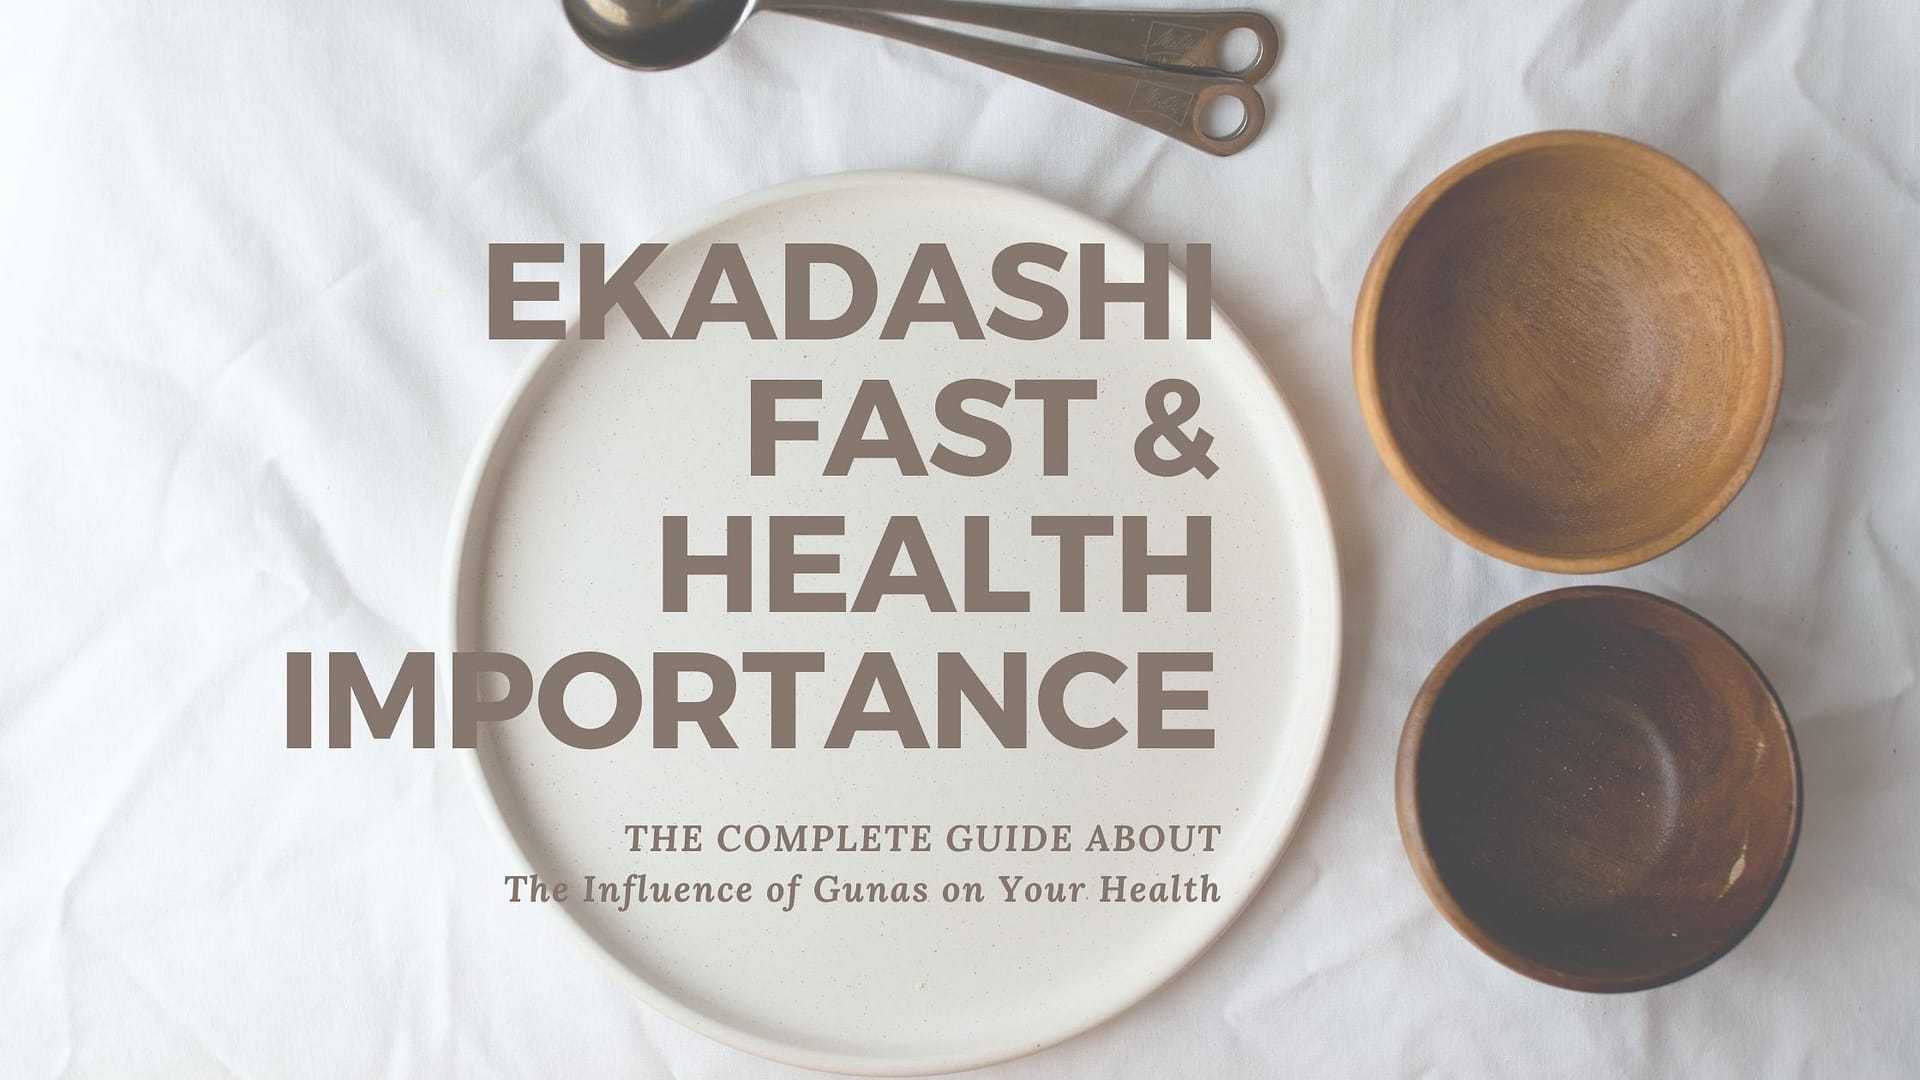 What is Ekadashi fast? And why Ekadashi is important for your health